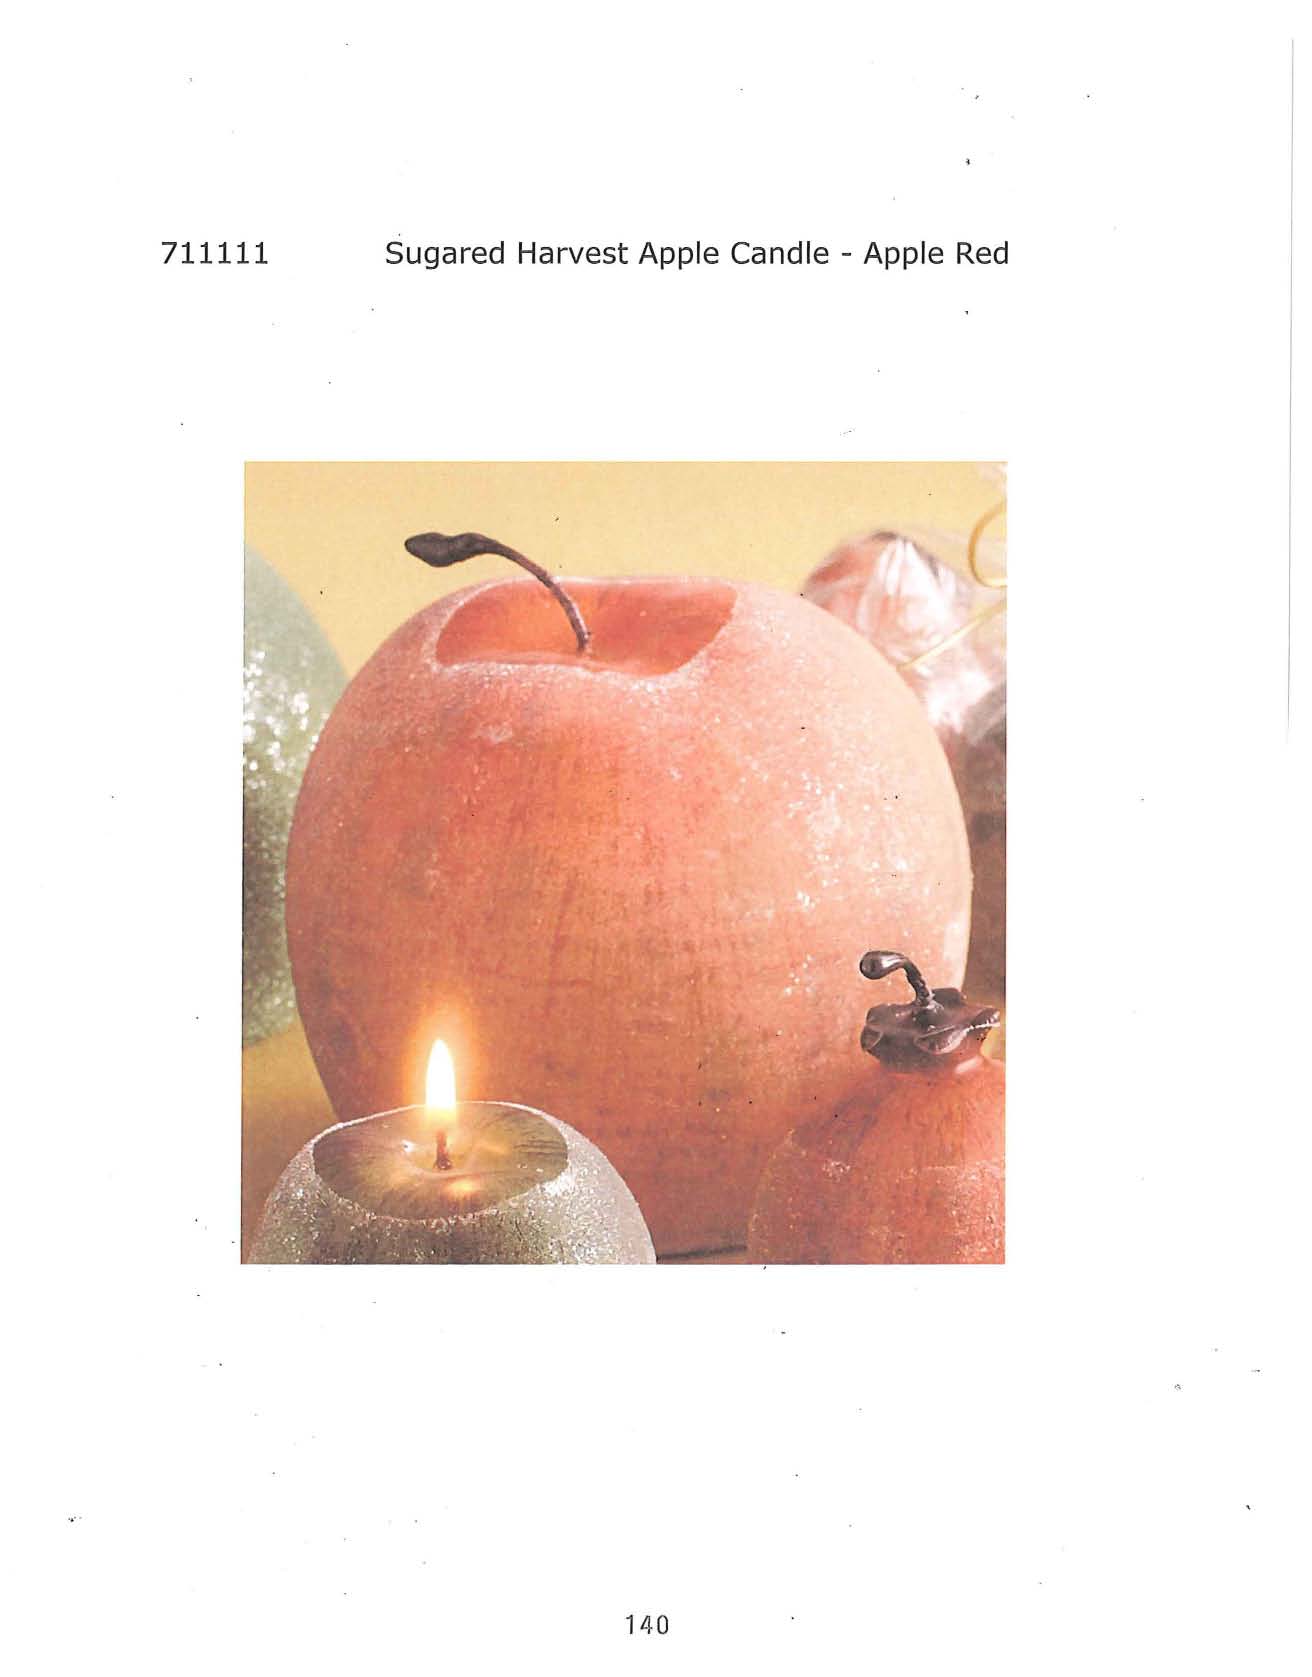 Sugared Harvest Apple Candle - Apple Red